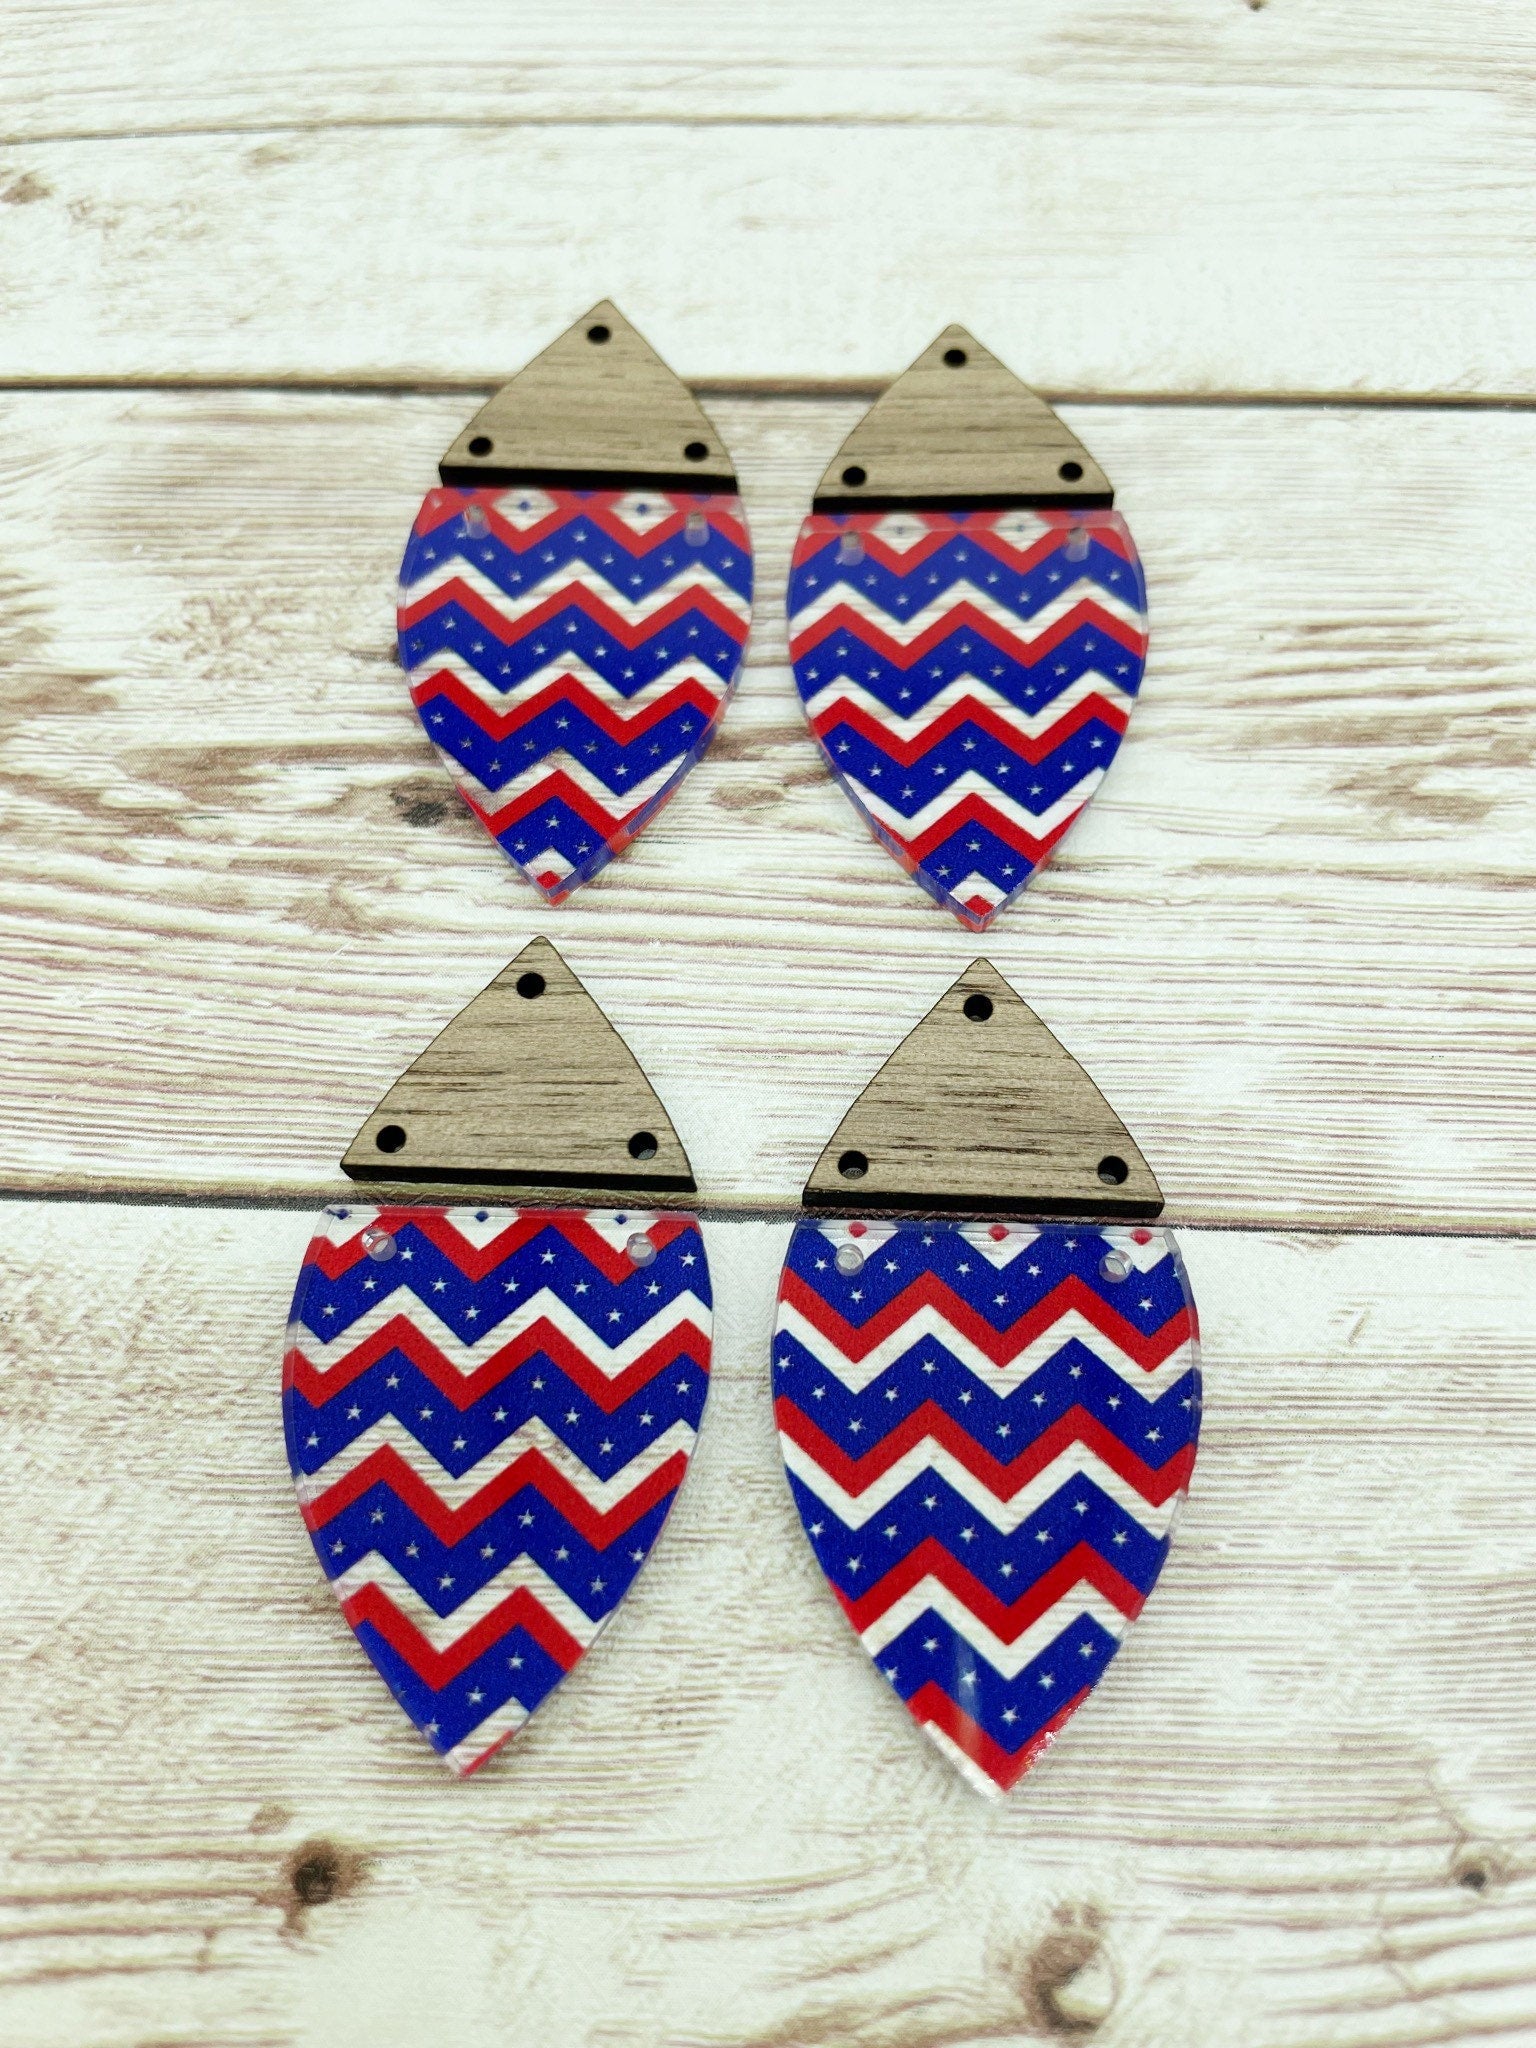 Patterned Acrylic and Wood Red White Blue Star Earring Blanks, DIY Jewelry Making